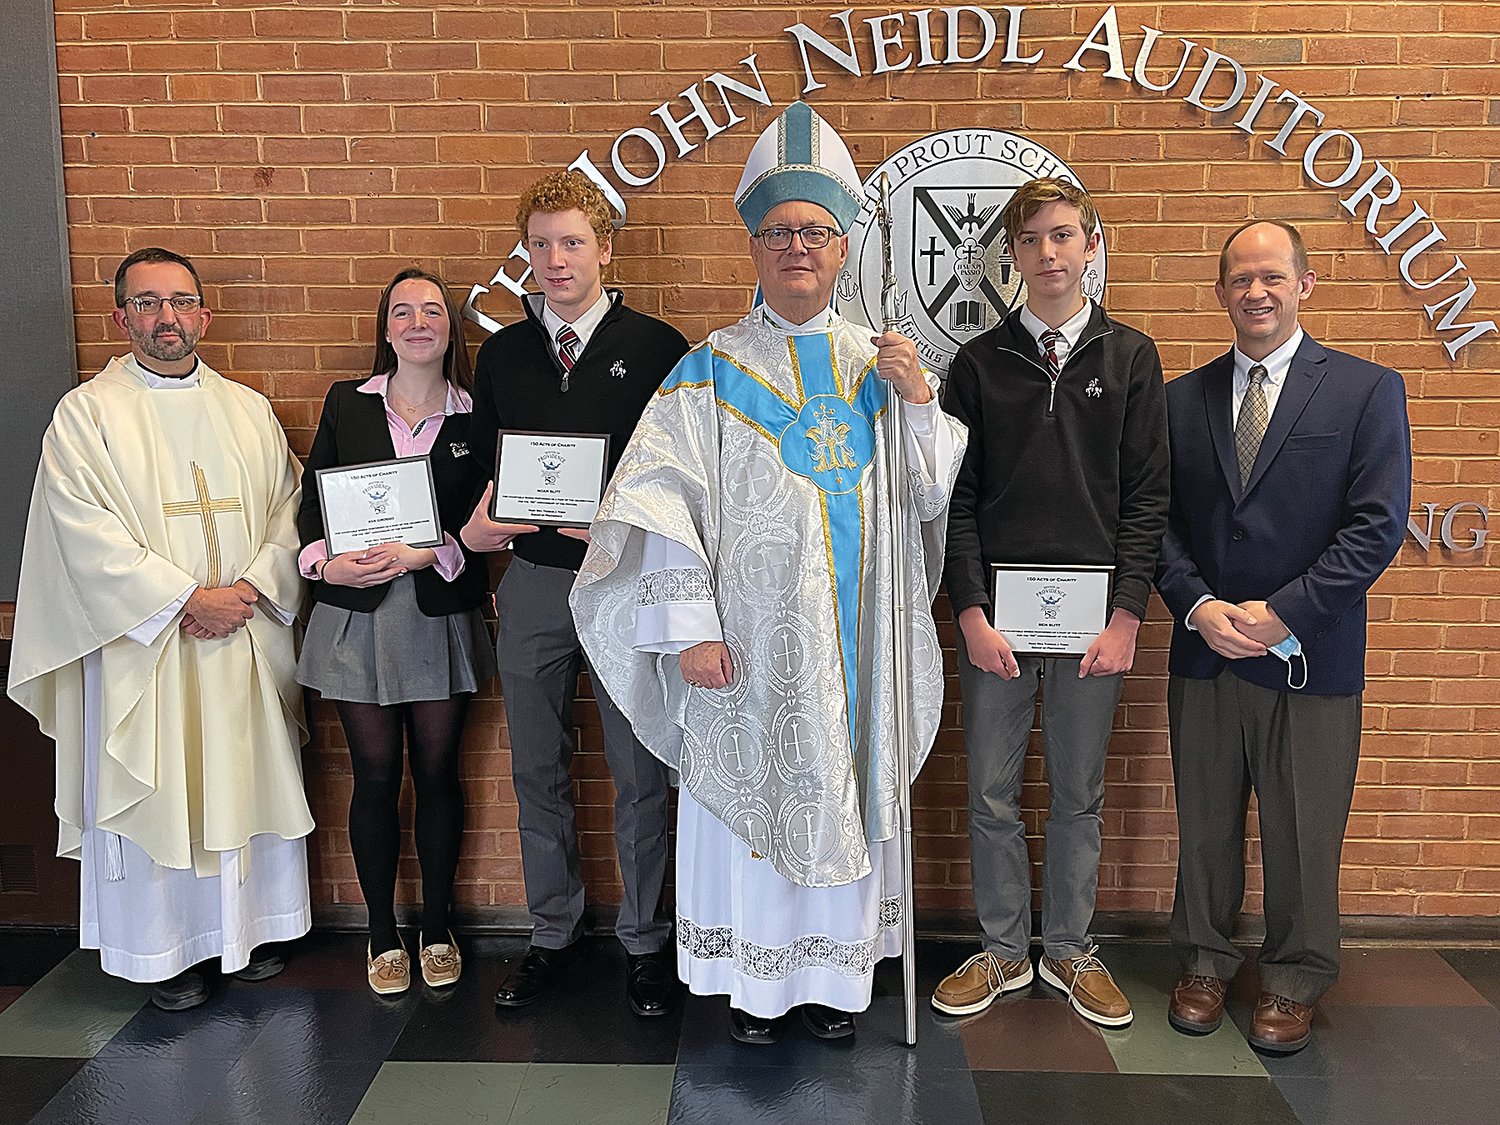 Bishop Thomas J. Tobin presents the first of the 150 Acts of Charity Awards to Prout School students Ava Grosso and brothers Noah and Ben Slitt. Prout Chaplain Father Carl Fisette and Secretary of Catholic Charities and Social Ministry James Jahnz join the group for a photo.